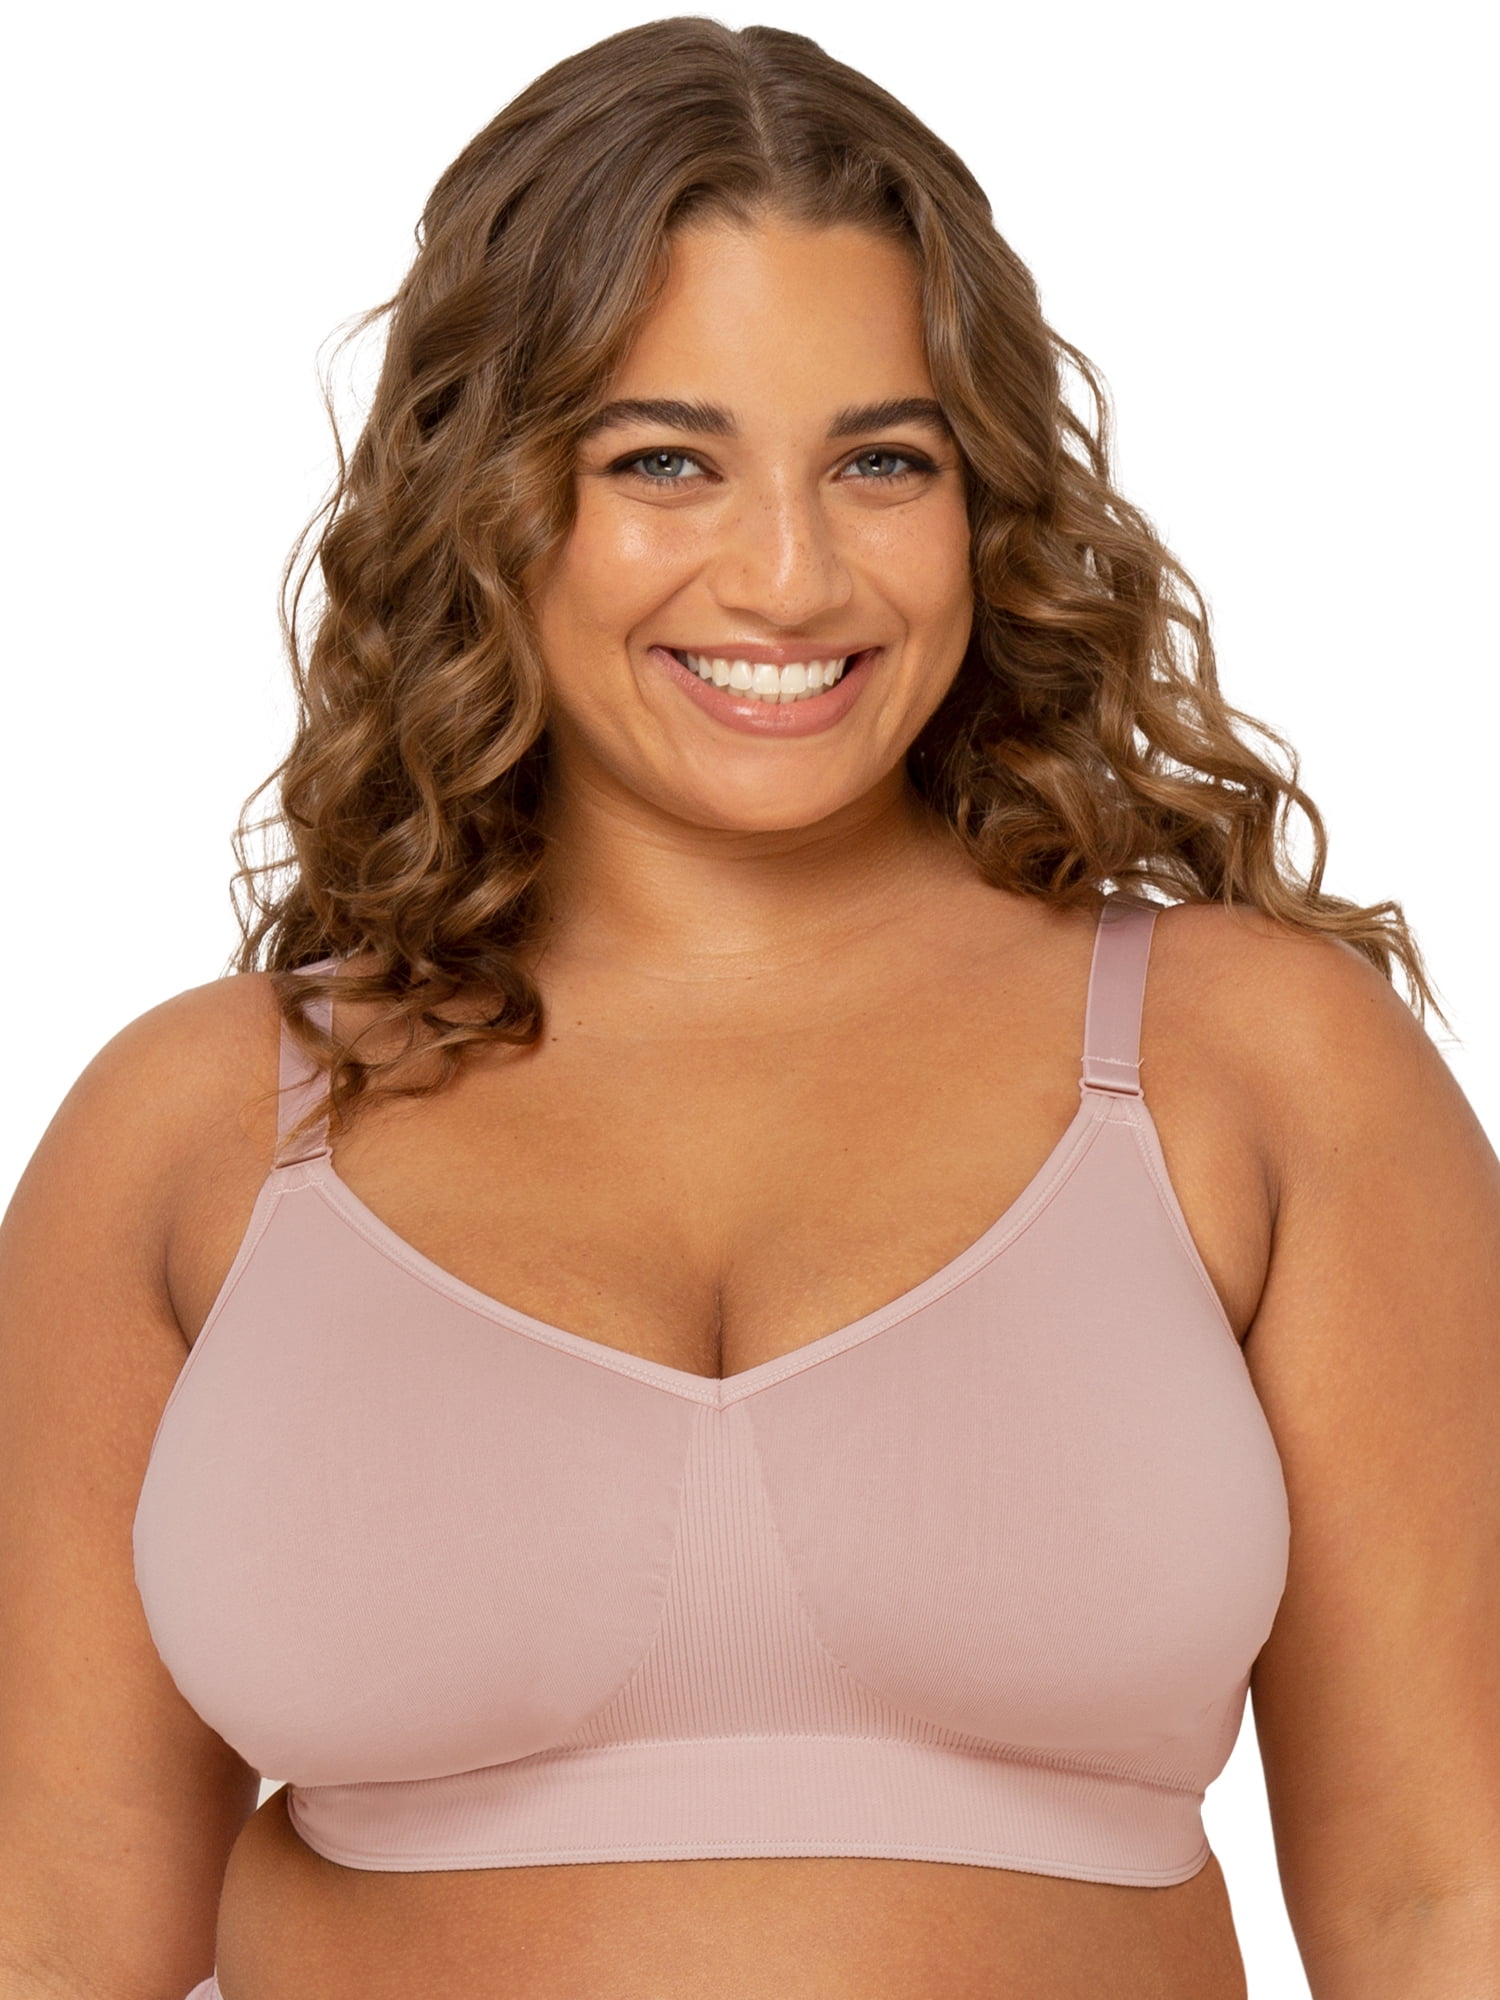 How's these wireless bras fit on body? Let's try them with